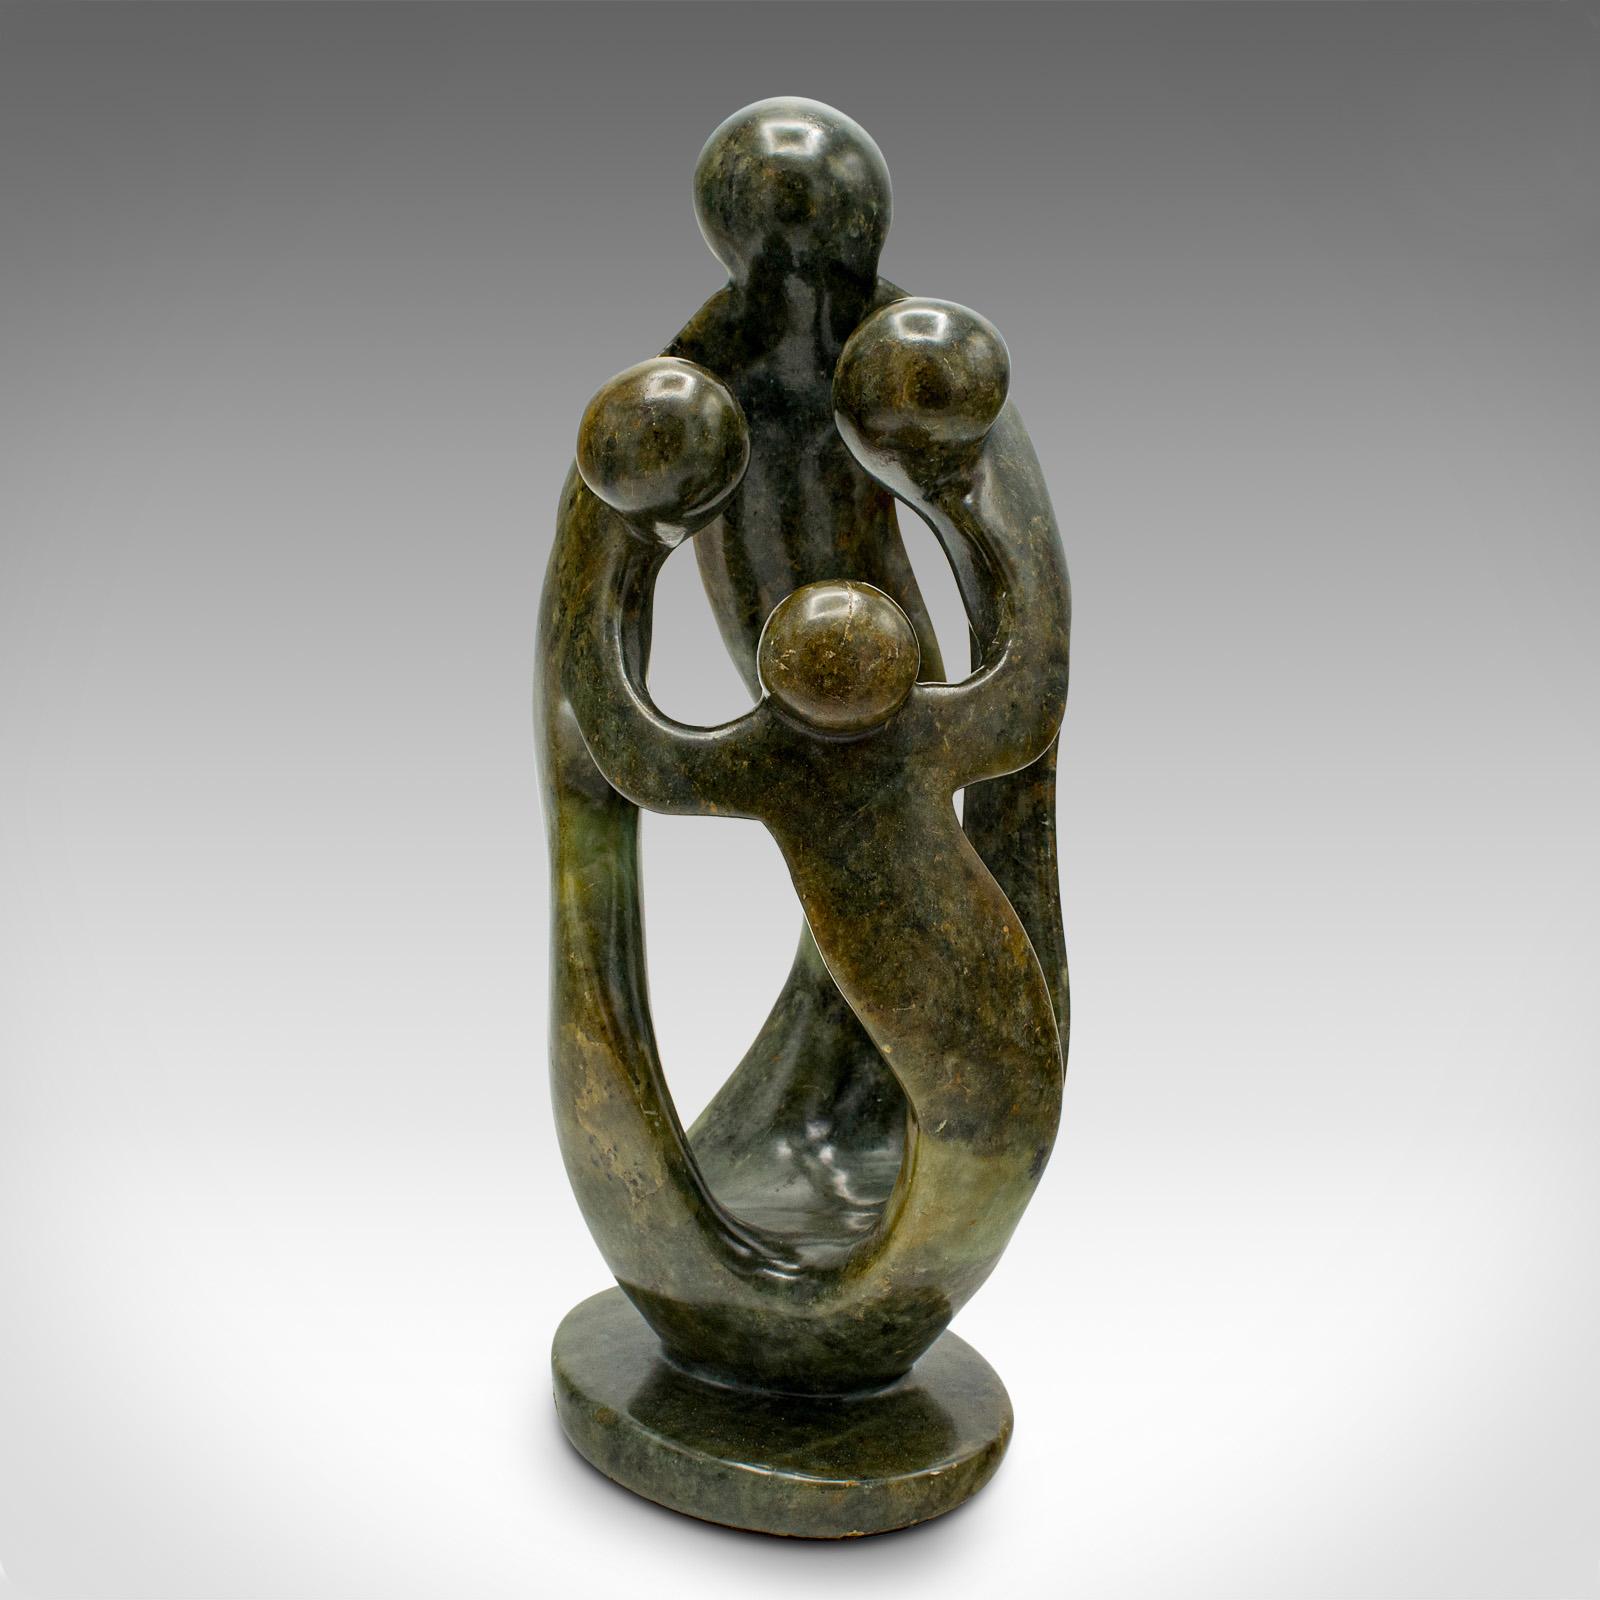 This is a vintage abstract family statue. A tribal African, polished hardstone decorative ornament, dating to the mid 20th century, circa 1960.

A parent and three children crafted from quality stone
Displaying a desirable aged patina and in good